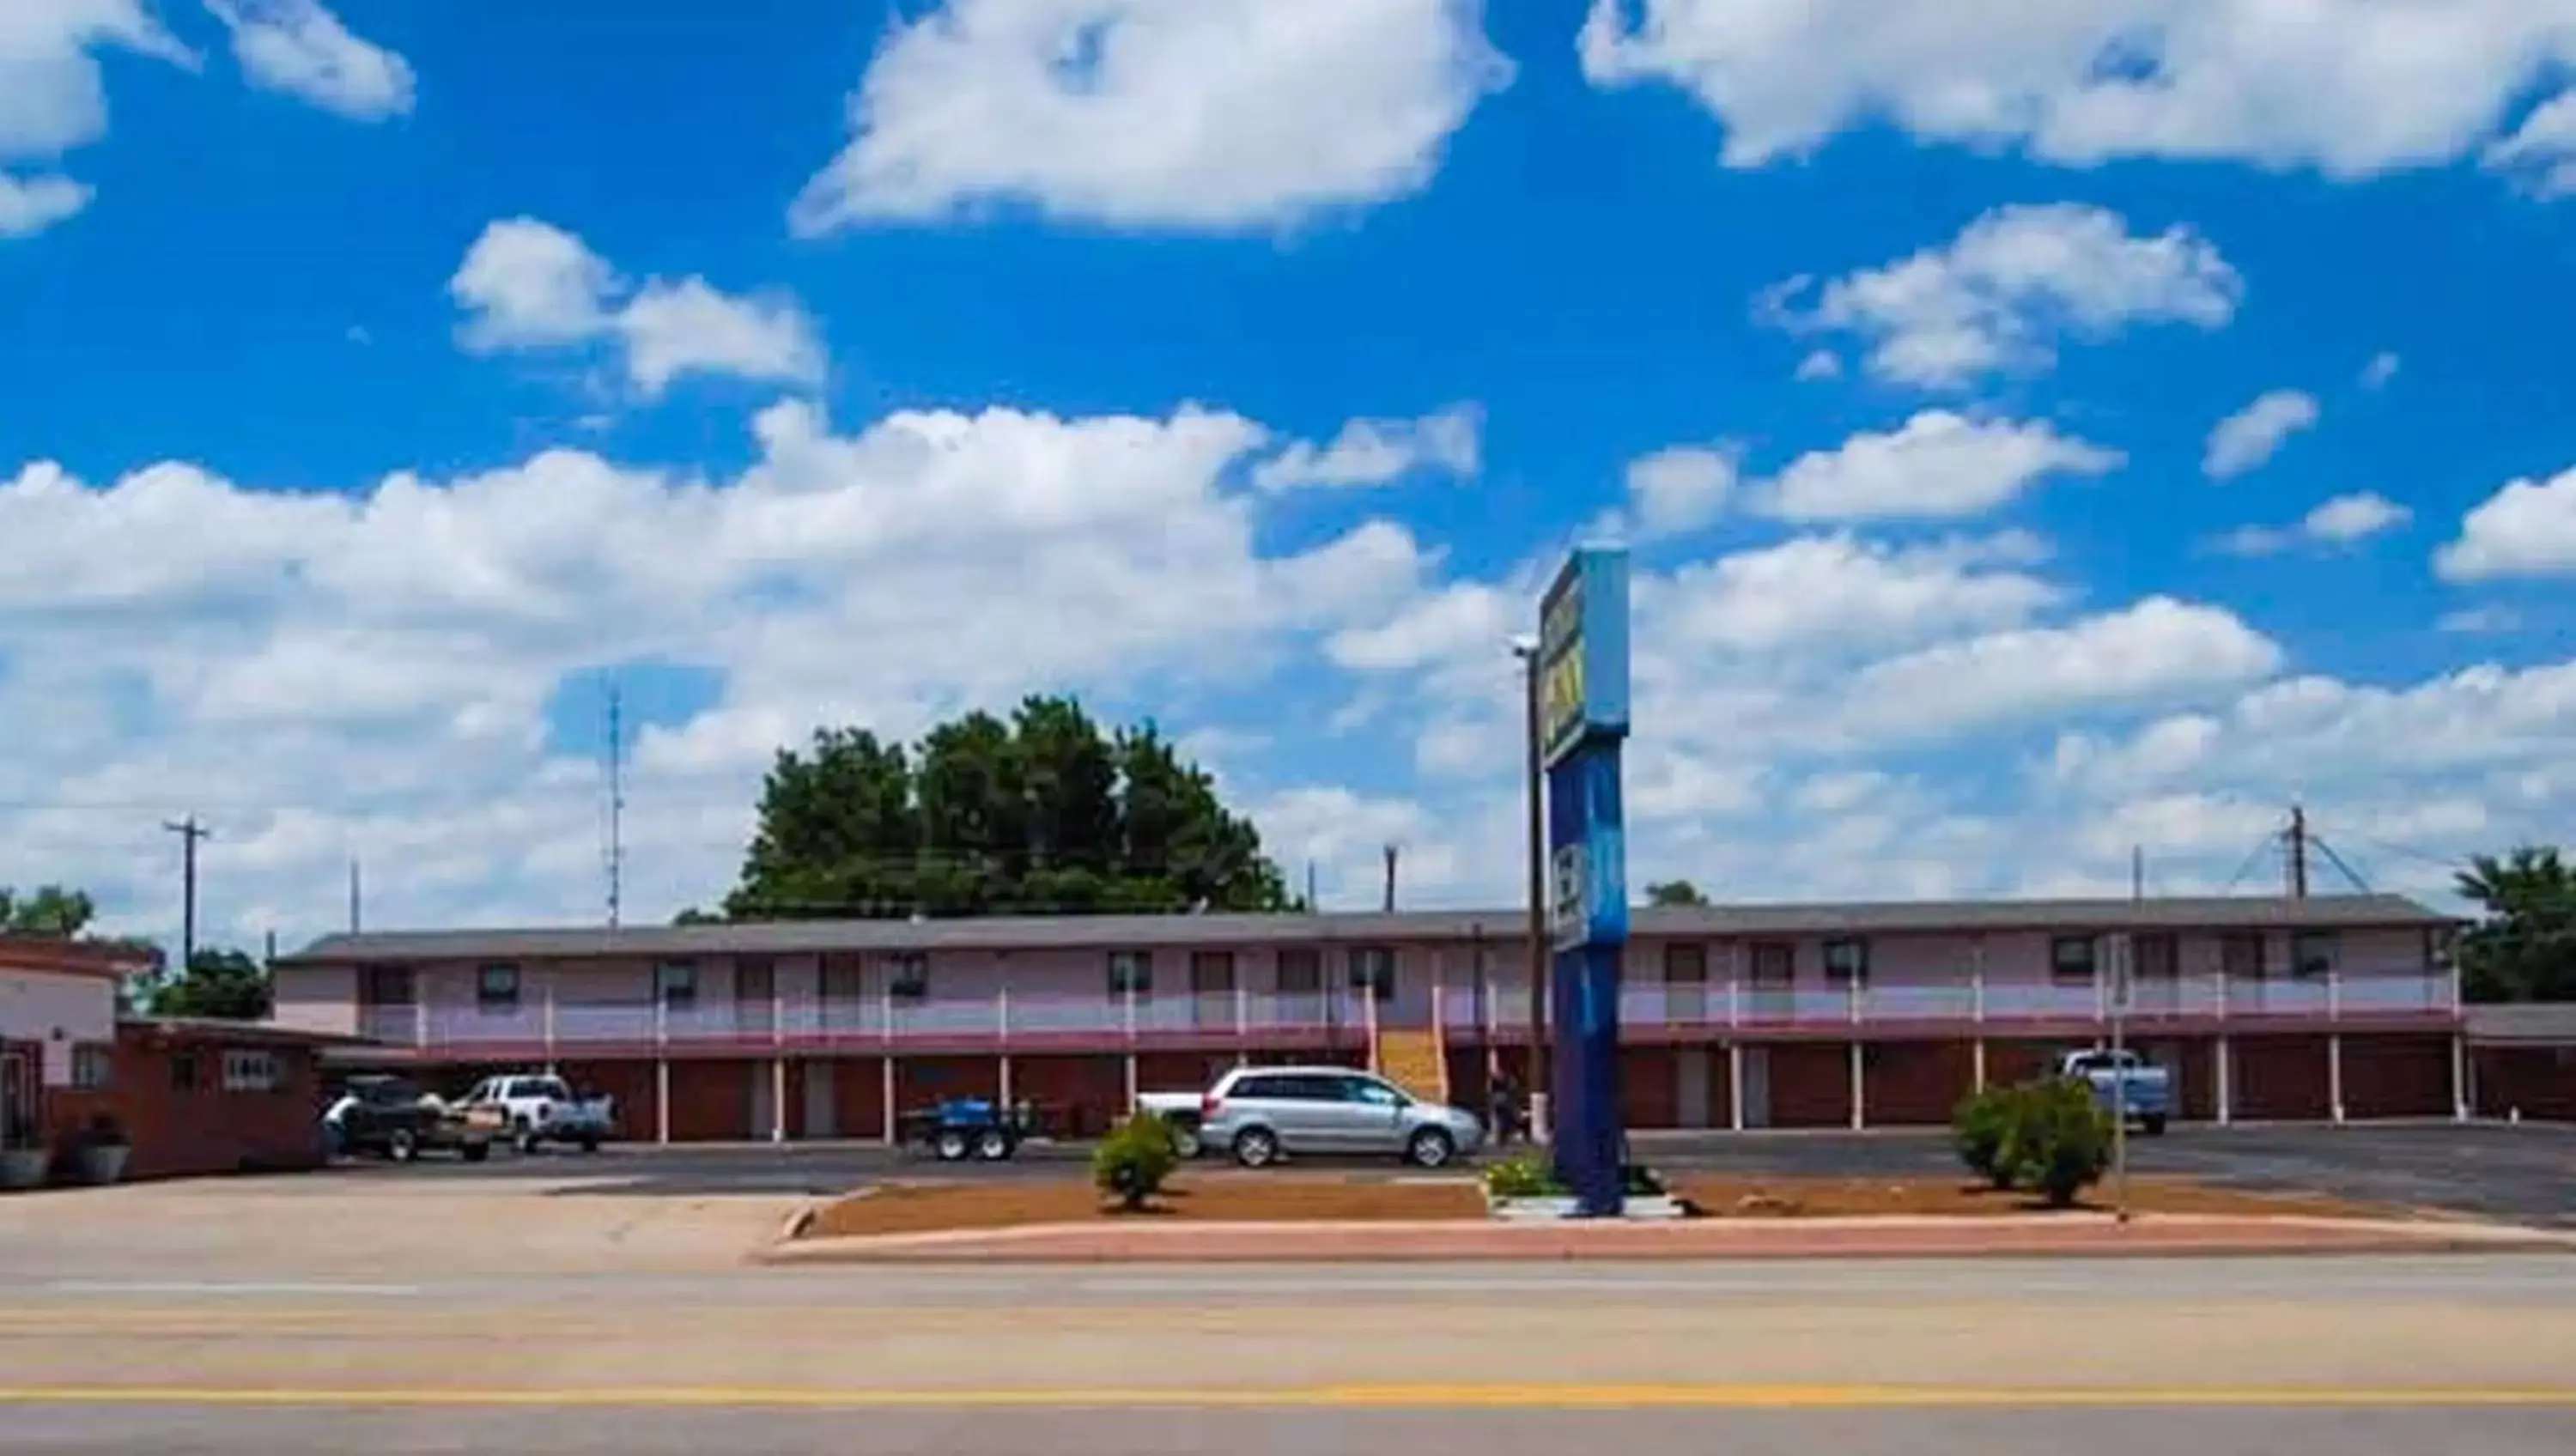 Property building in American Inn & Suites Childress